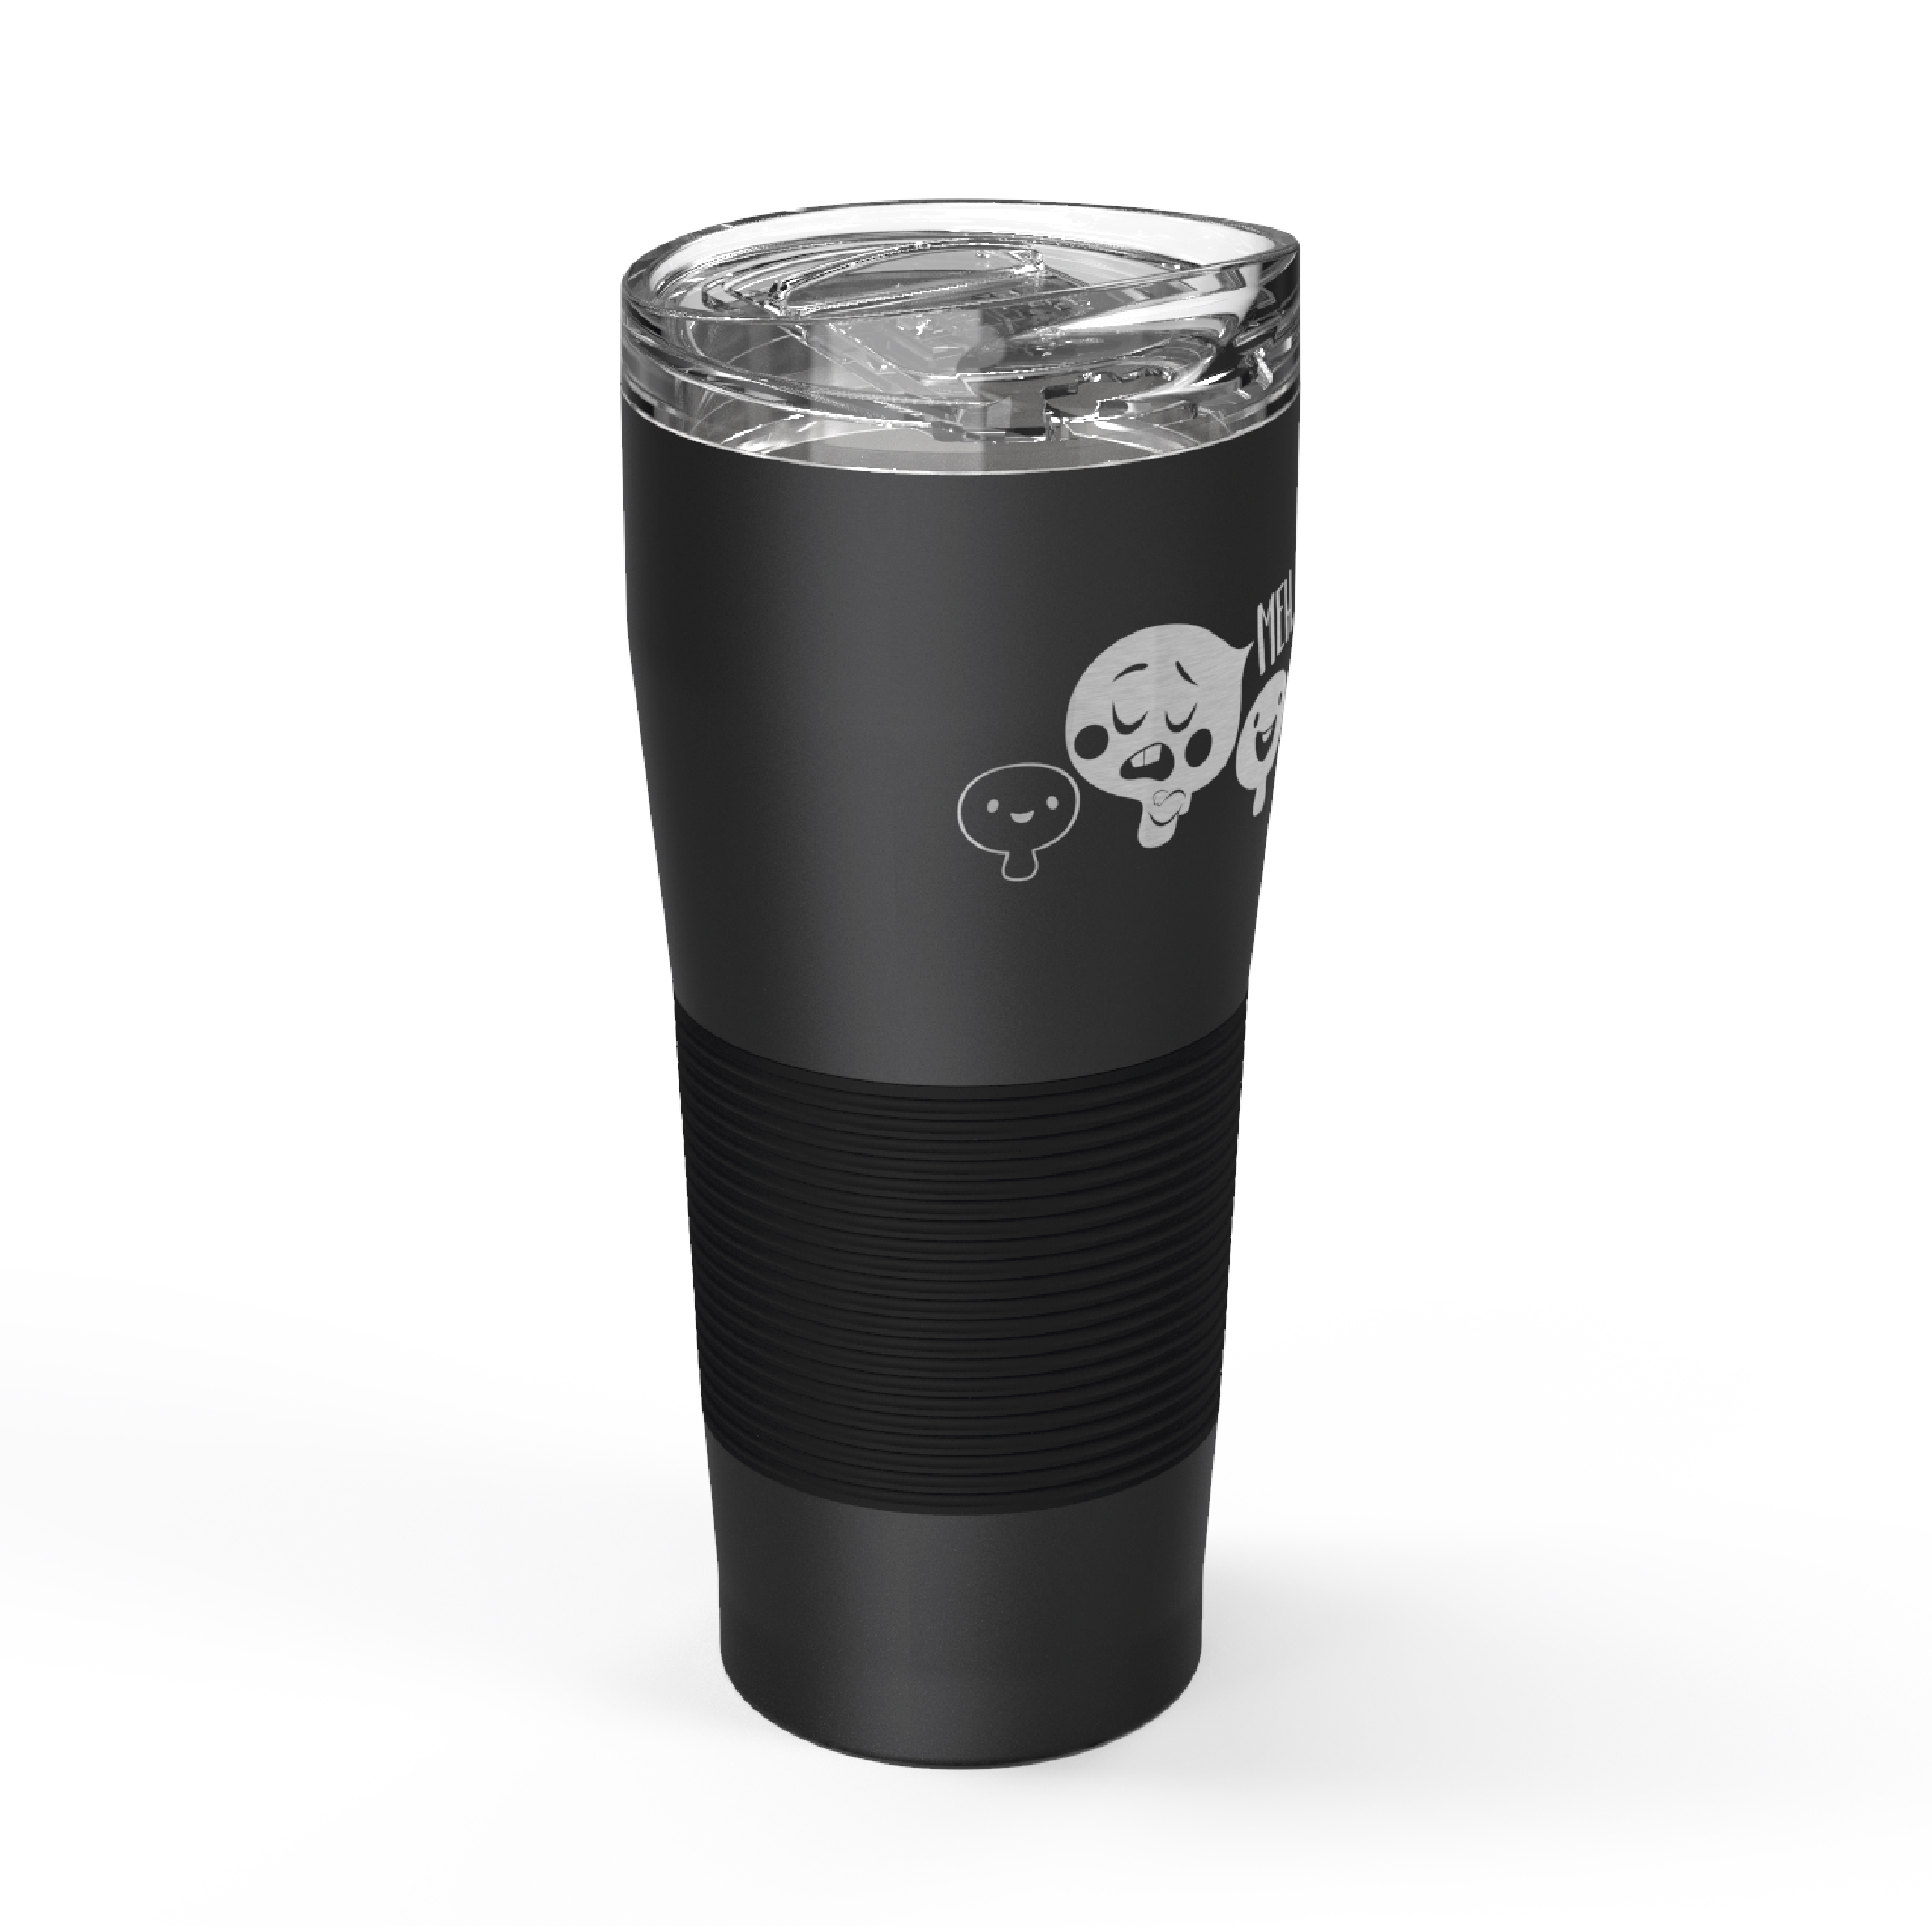 Soul 28 ounce Insulated Stainless Steel Travel Tumbler, #22 slideshow image 4